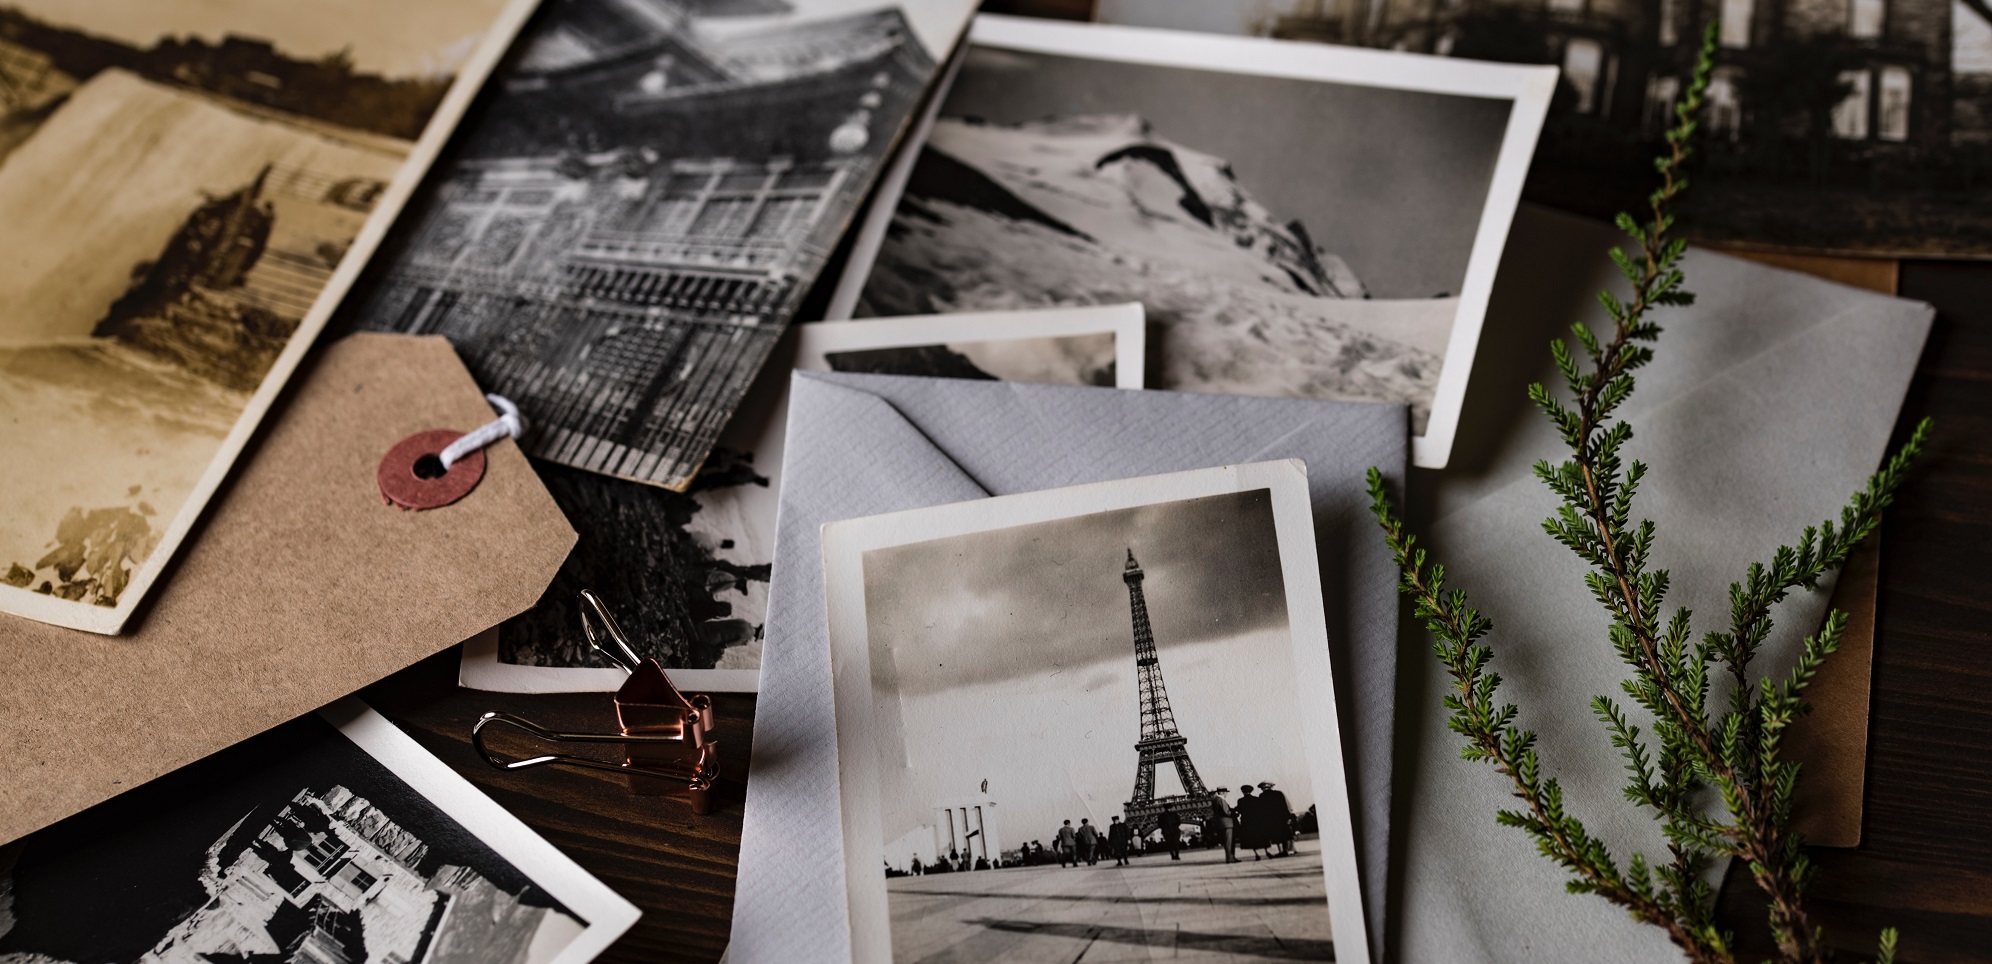 Spring Cleaning: How to Digitize Old Photos